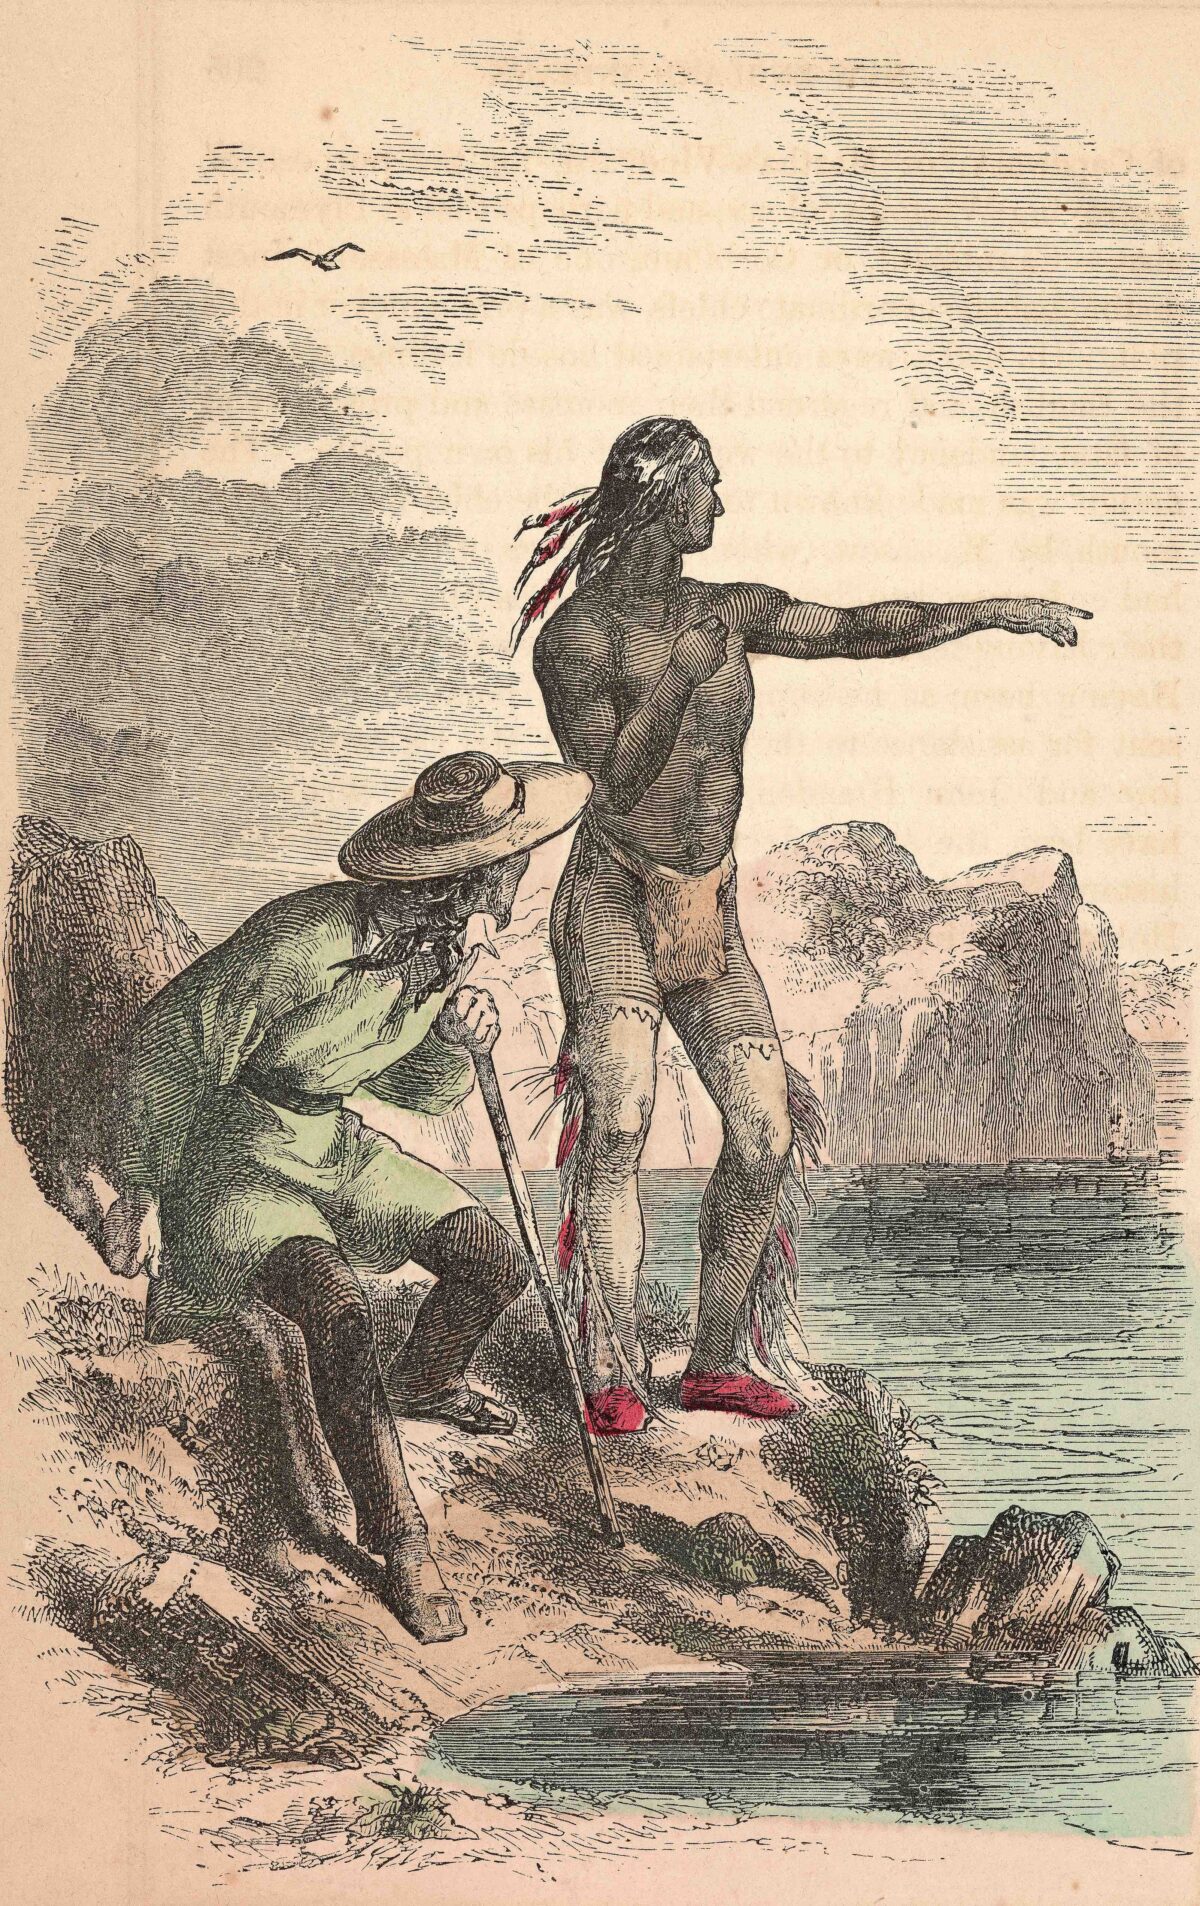 Illustration depicting Native American Squanto (aka Tisquantum, died 1622), of the Patuxet tribe, serving as guide and interpreter for the pilgrim colonists at the Plymouth Colony and Massasoit, circa 1621. He died after contracting smallpox while guiding William Bradford's expedition around Cape Cod, Massachusetts. (Kean Collection/Archive Photos/Getty Images)